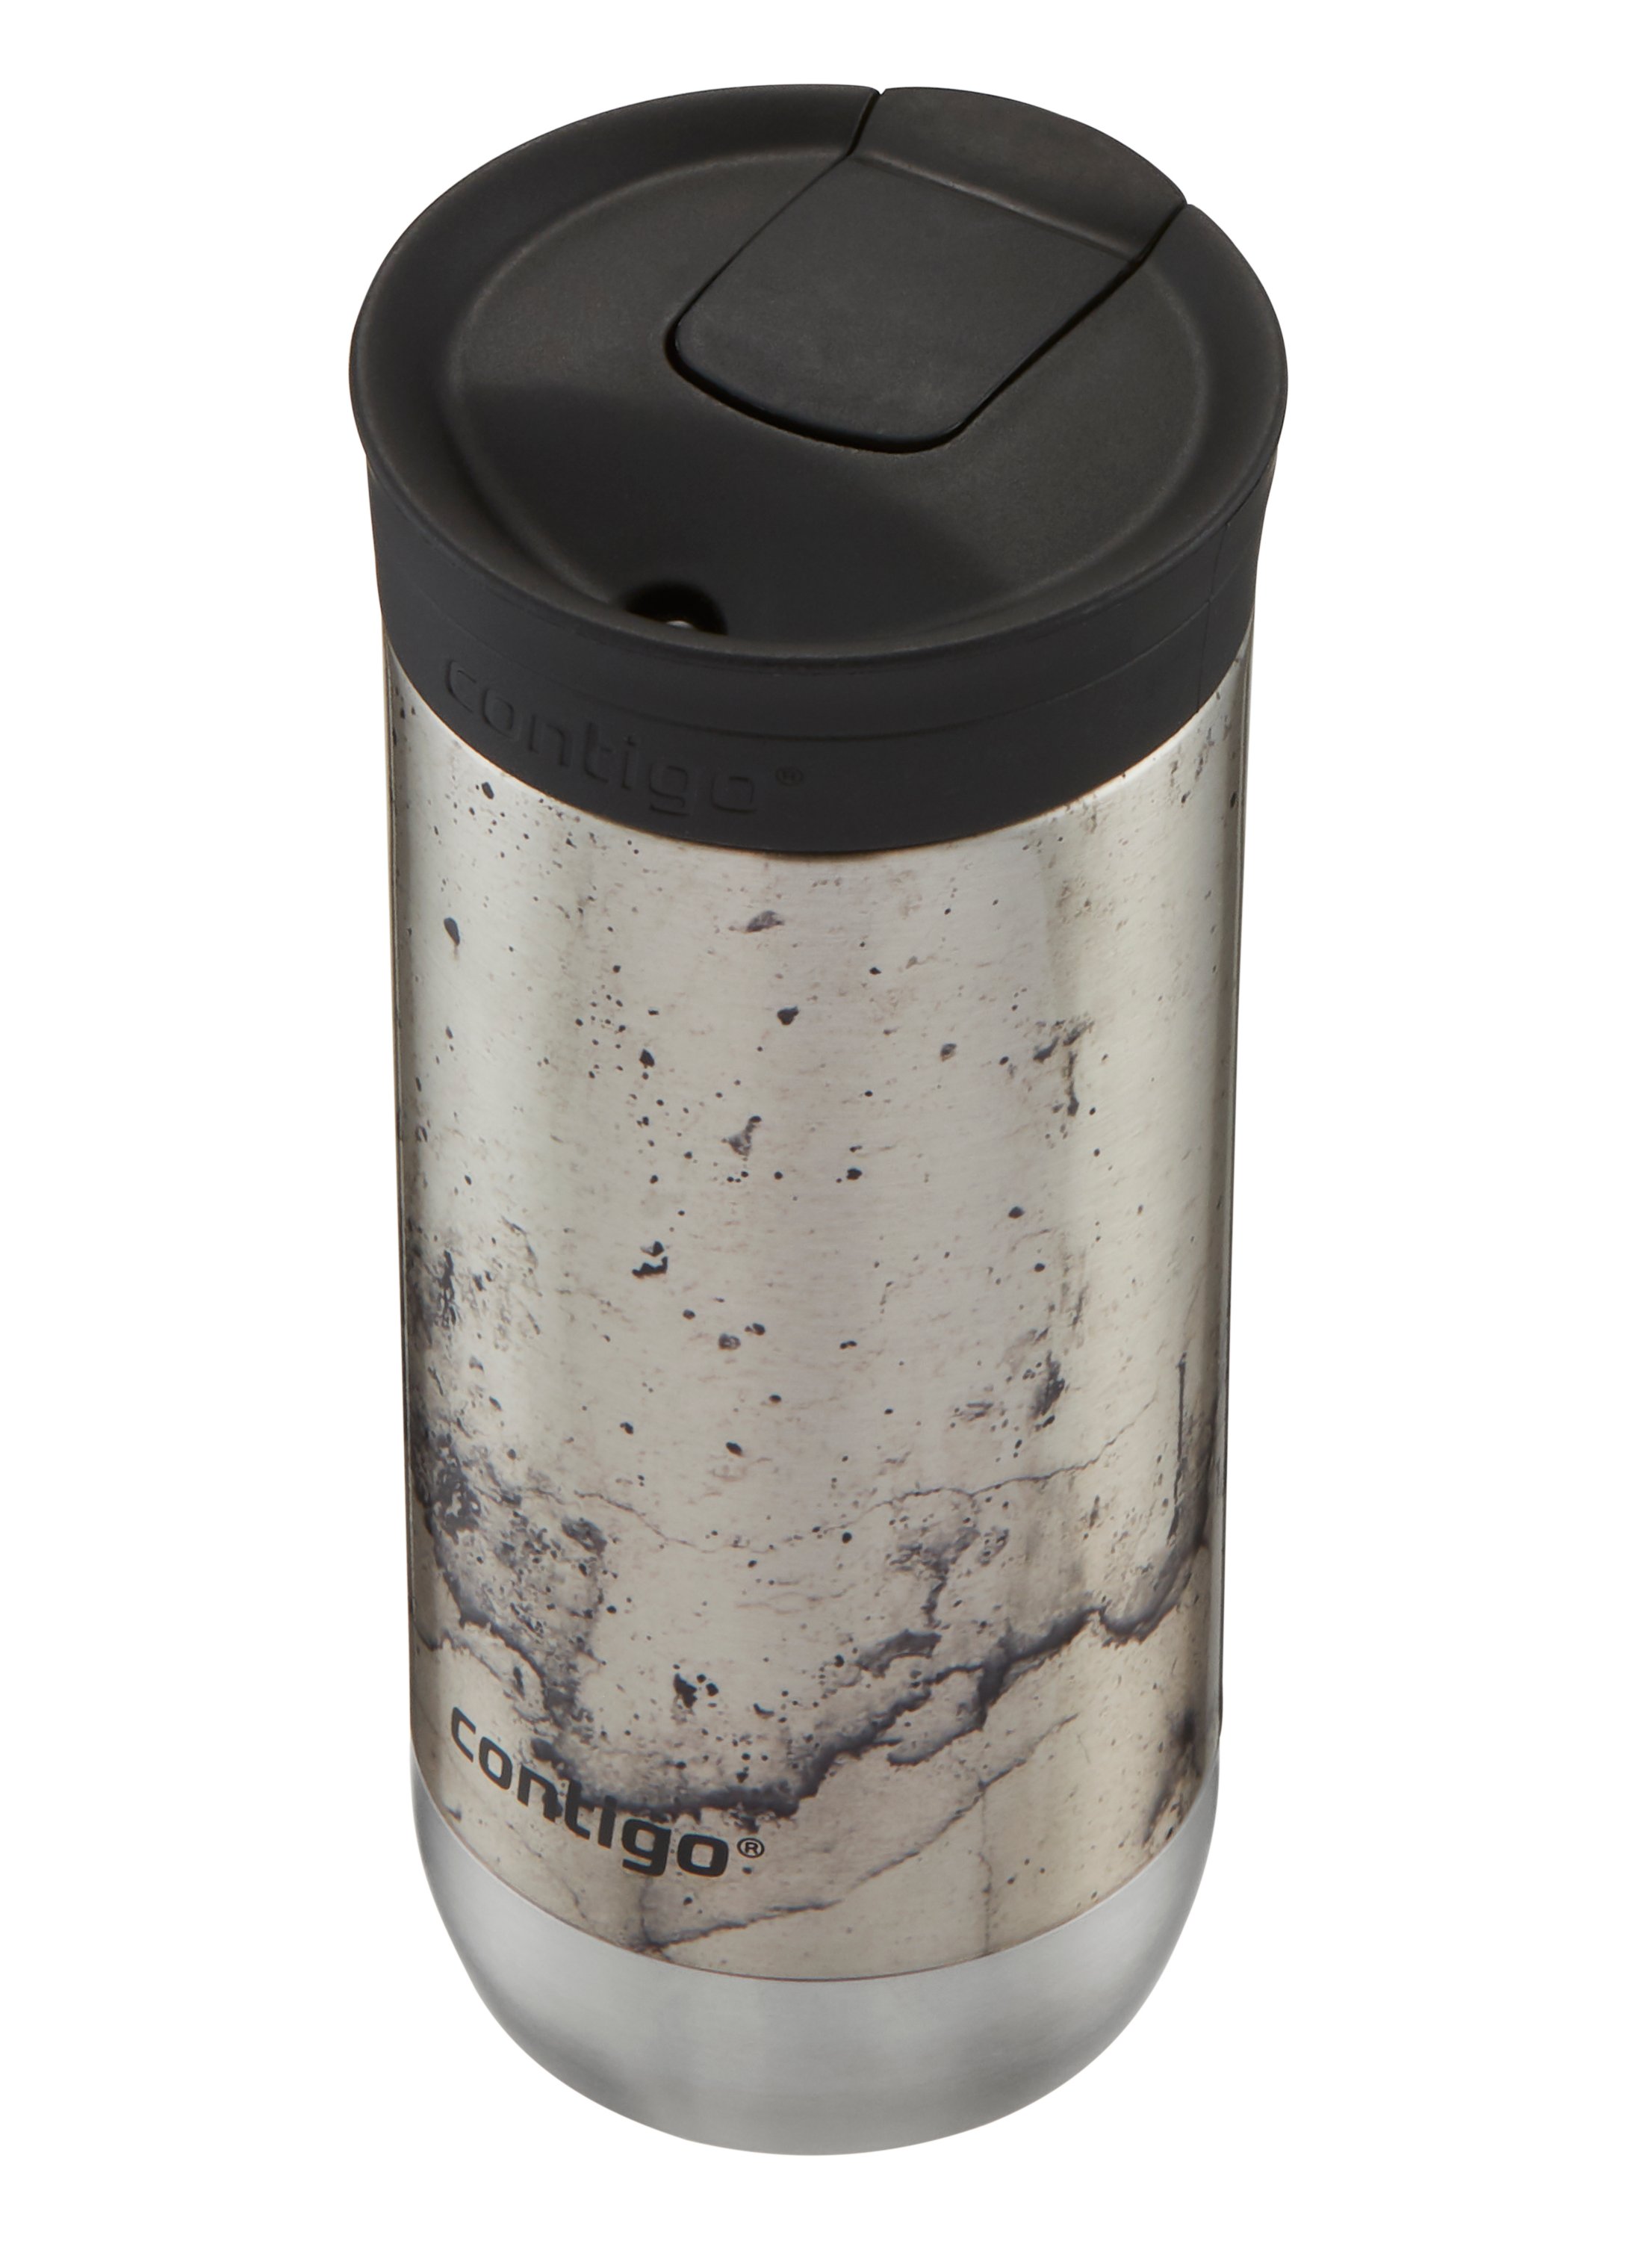 Huron Stainless Steel Travel Mug with SNAPSEAL™ Lid, 16oz